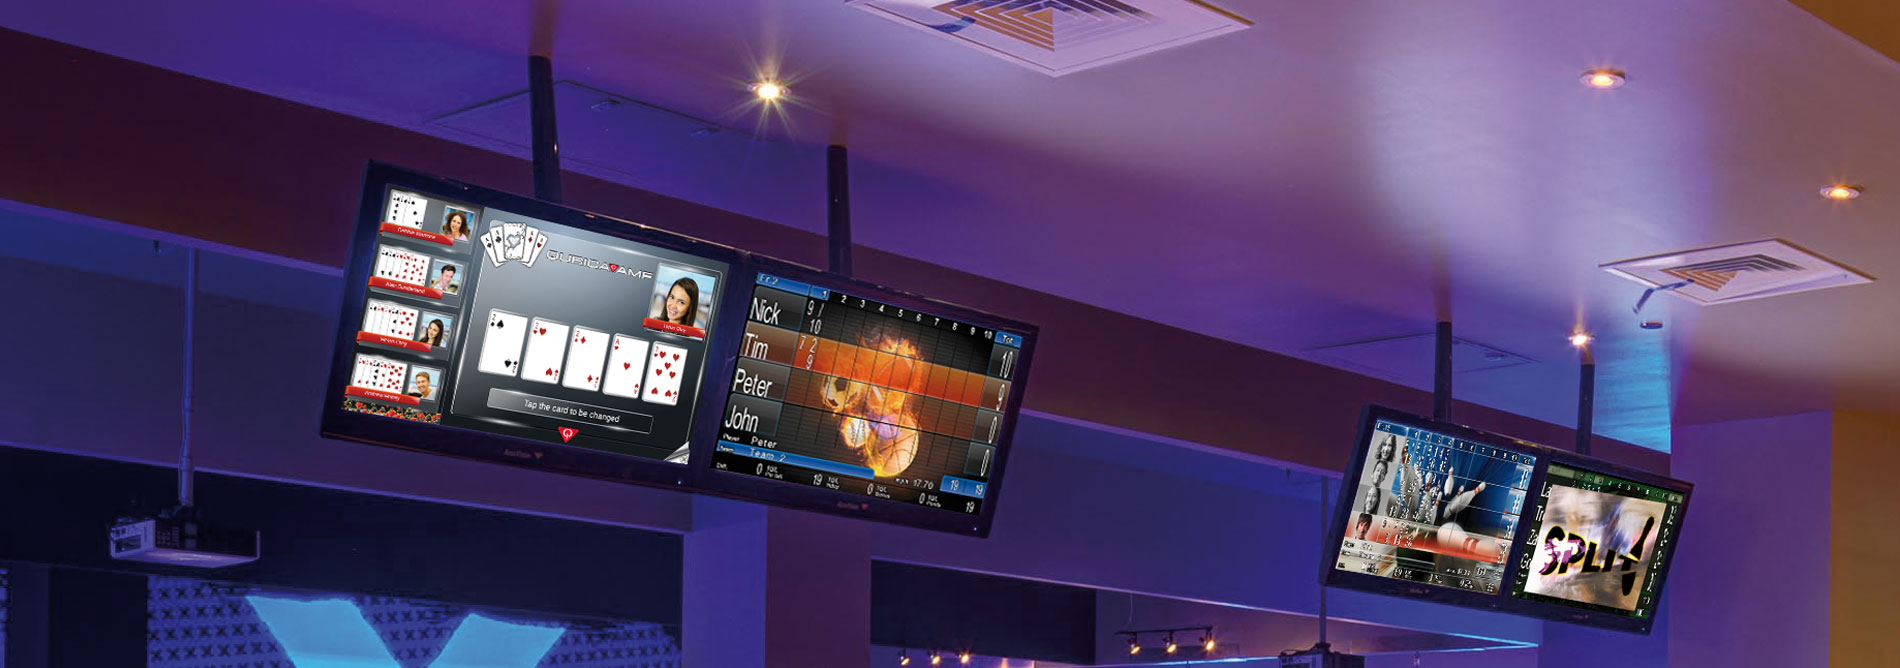 Bowling-QubicaAMF-Accuvision-Monitors-banner.jpg